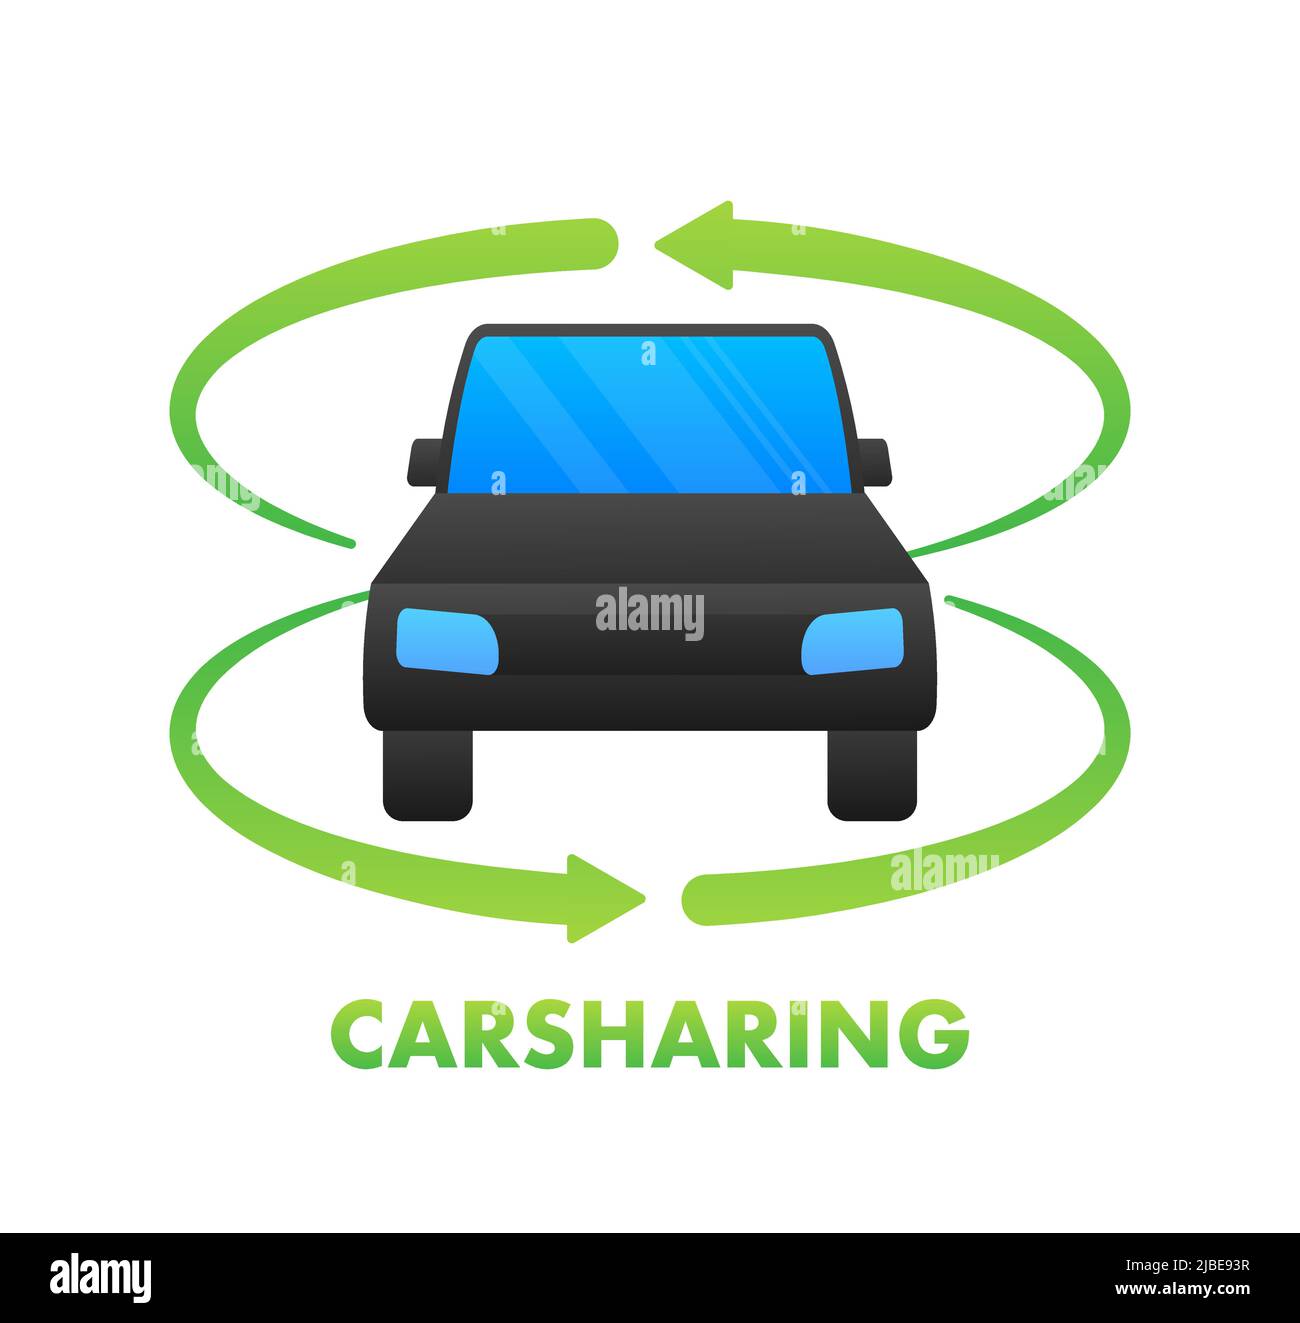 Car sharing concept. Carsharing vector icon on white background. lIllustration for mobile app design. Flat vector illustration Stock Vector